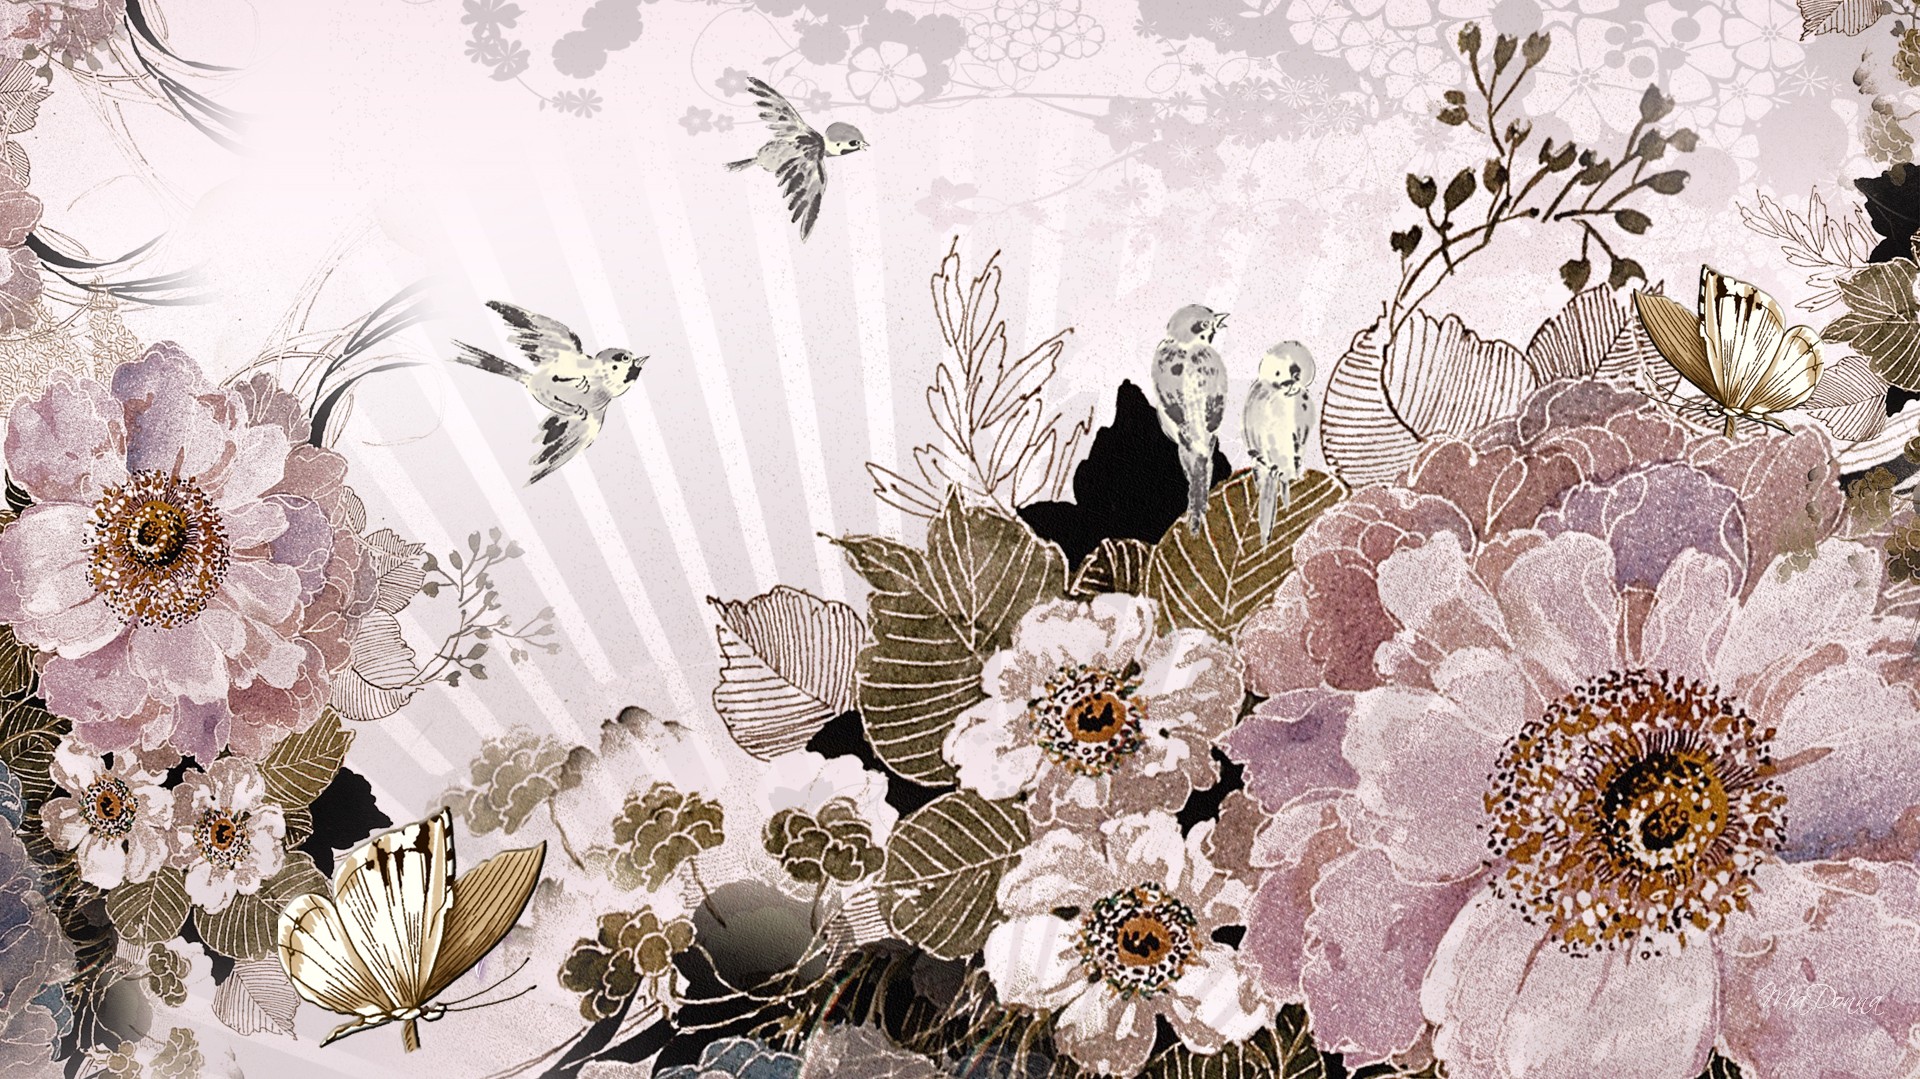 Birds Blossoms and Blooms wallpaper